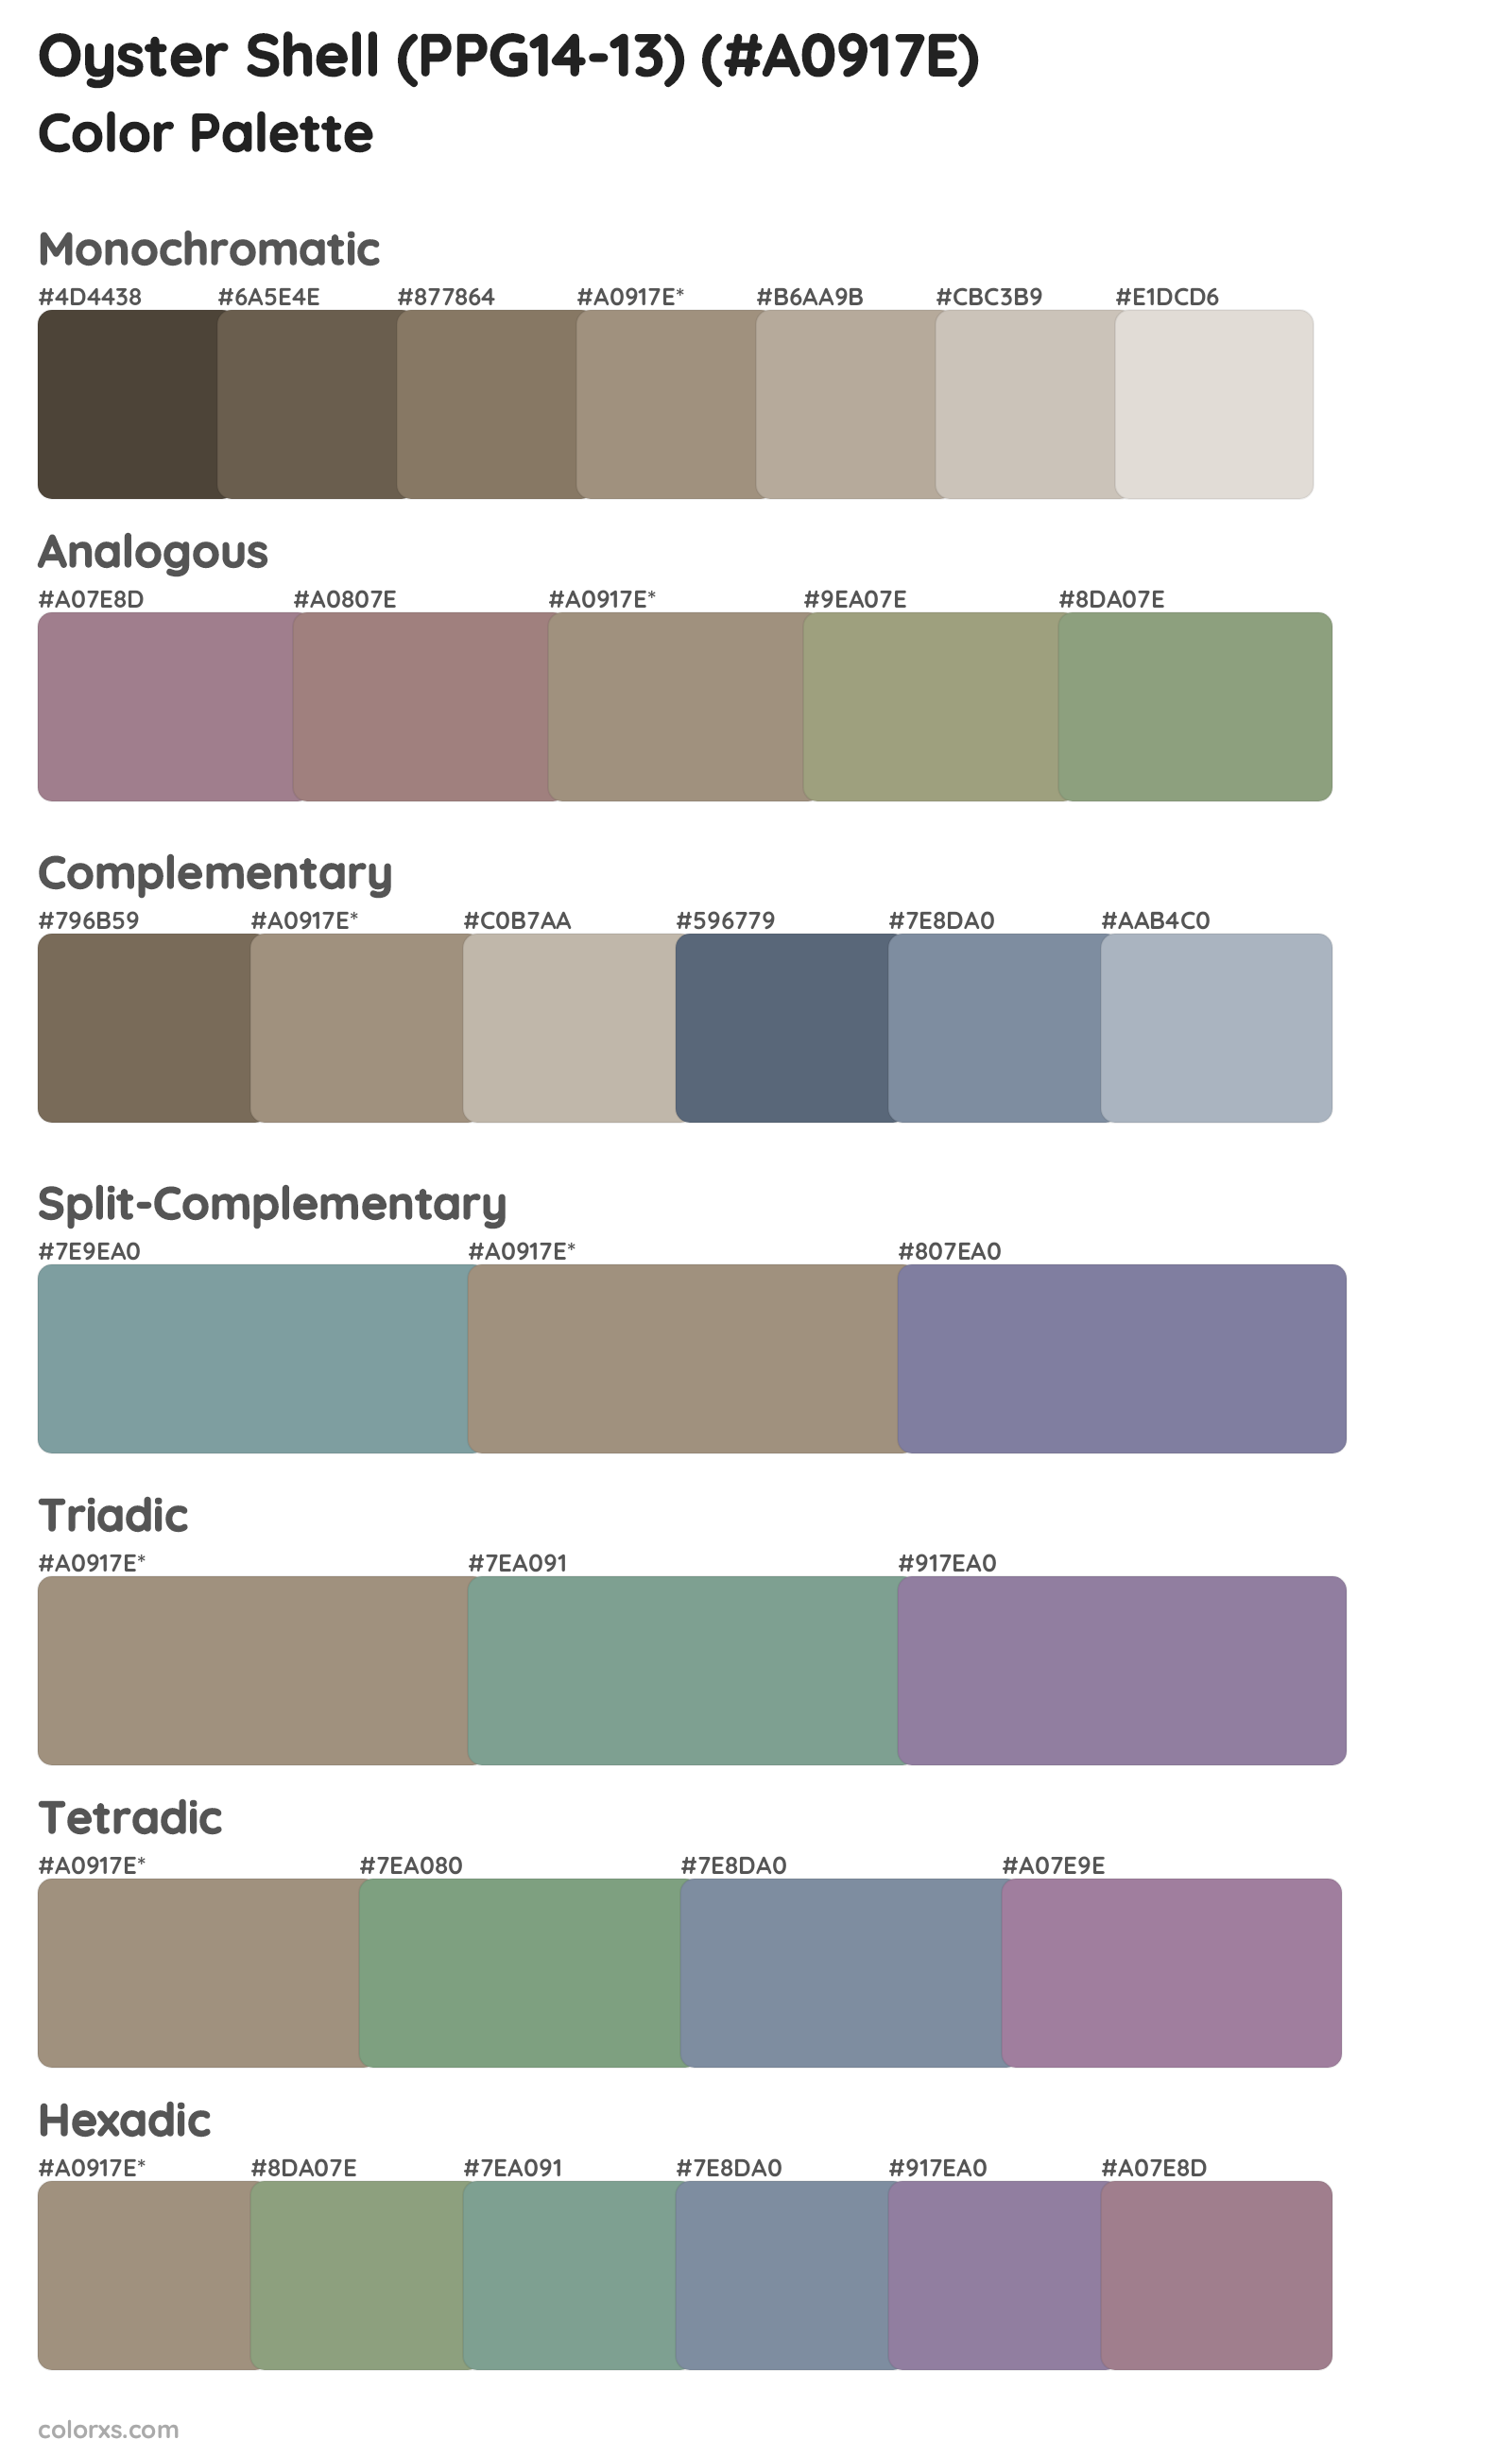 Oyster Shell (PPG14-13) Color Scheme Palettes